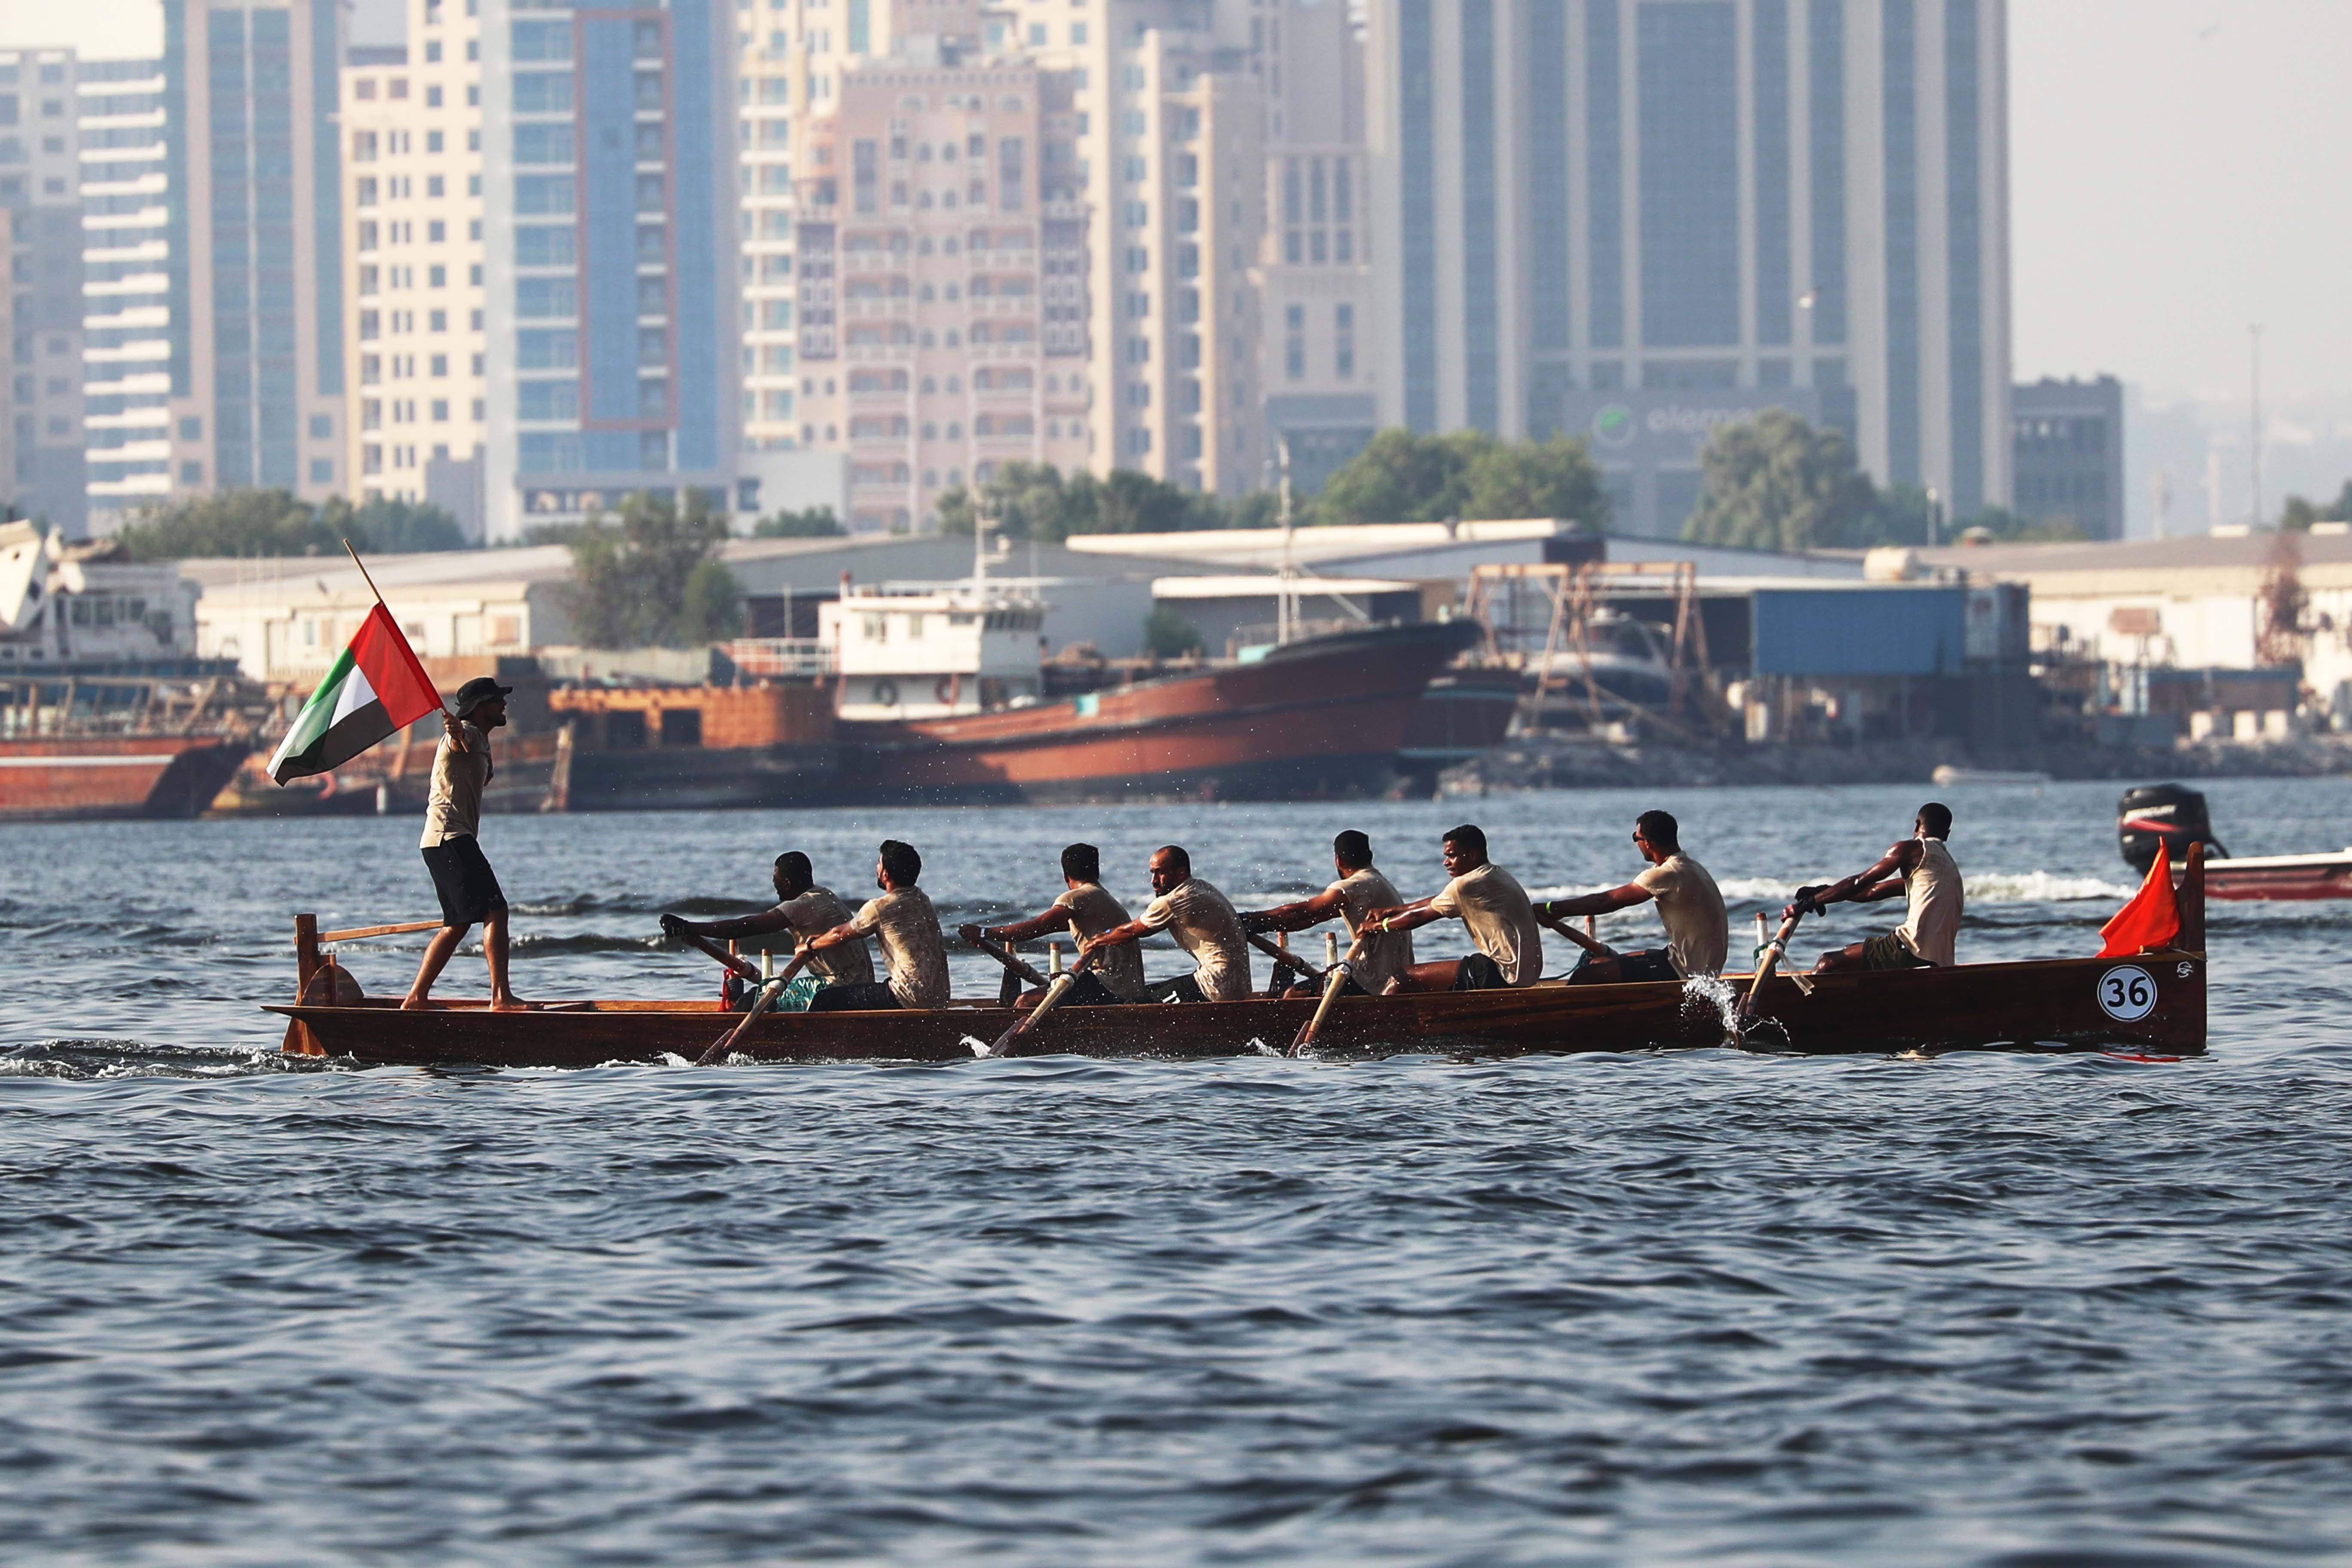 Second Round of Traditional Rowing Race on Saturday